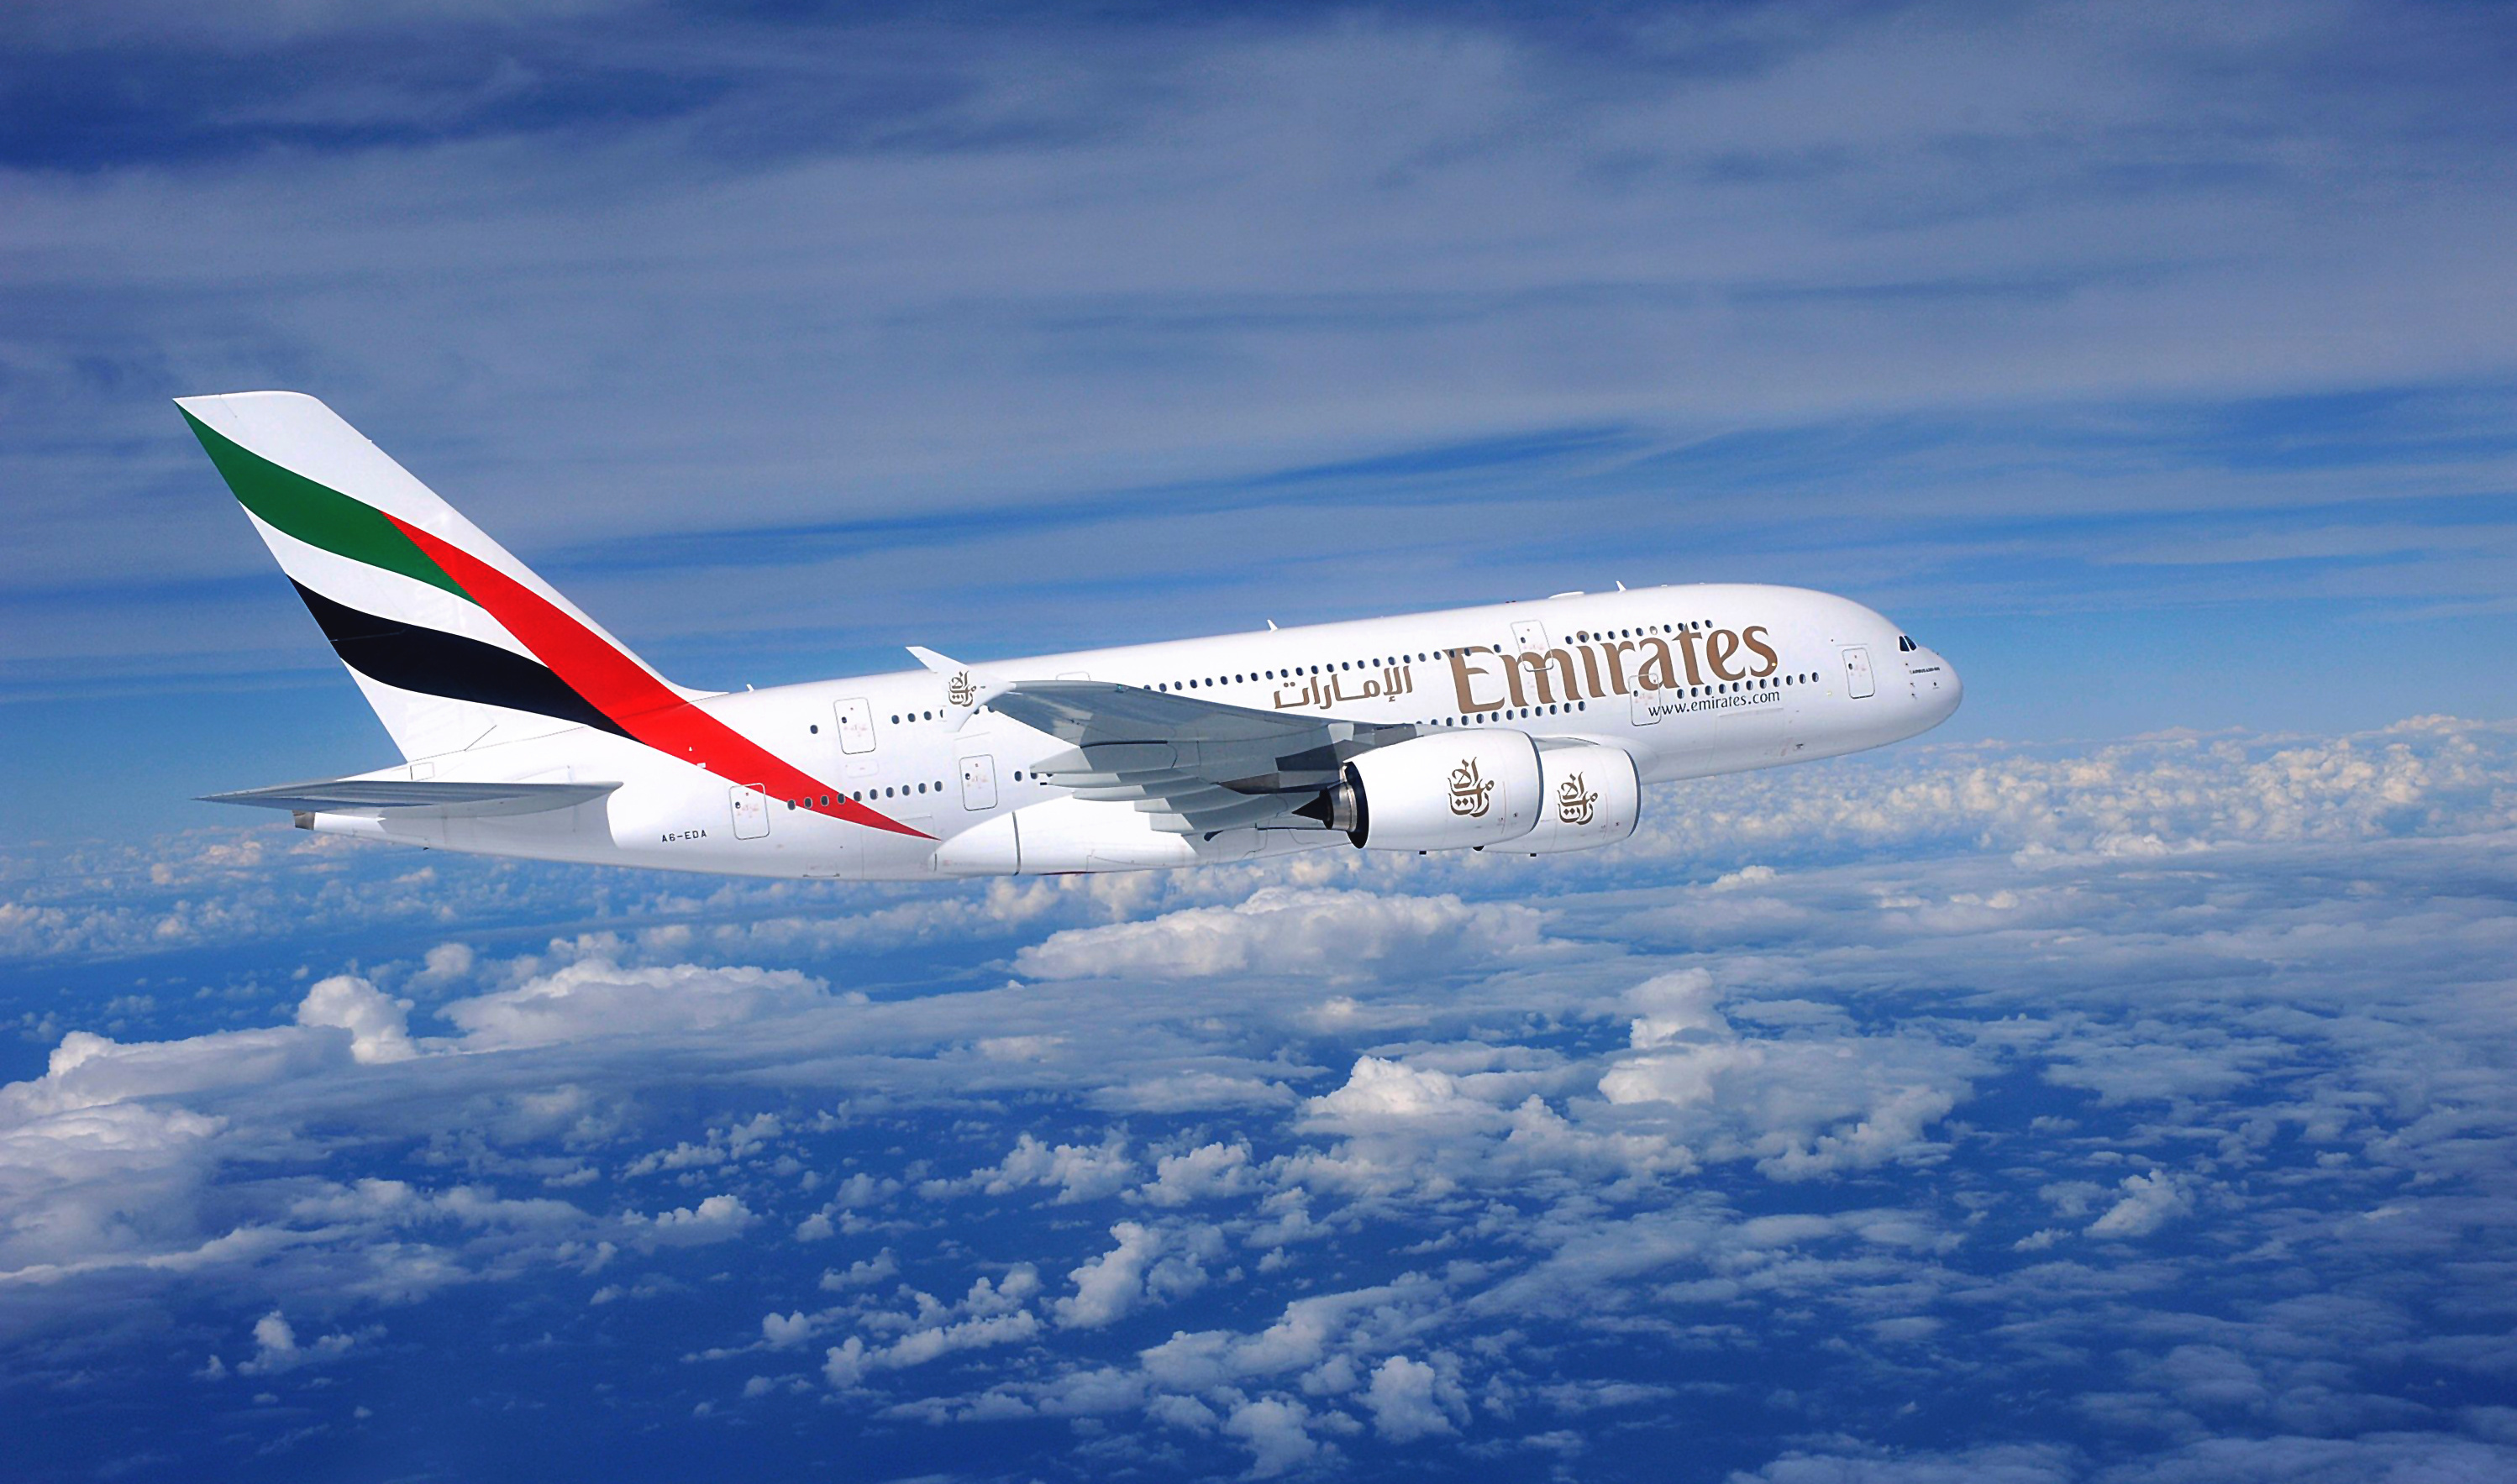 Emirates airline plane airbus airliner a380 wallpaper 2996x1767